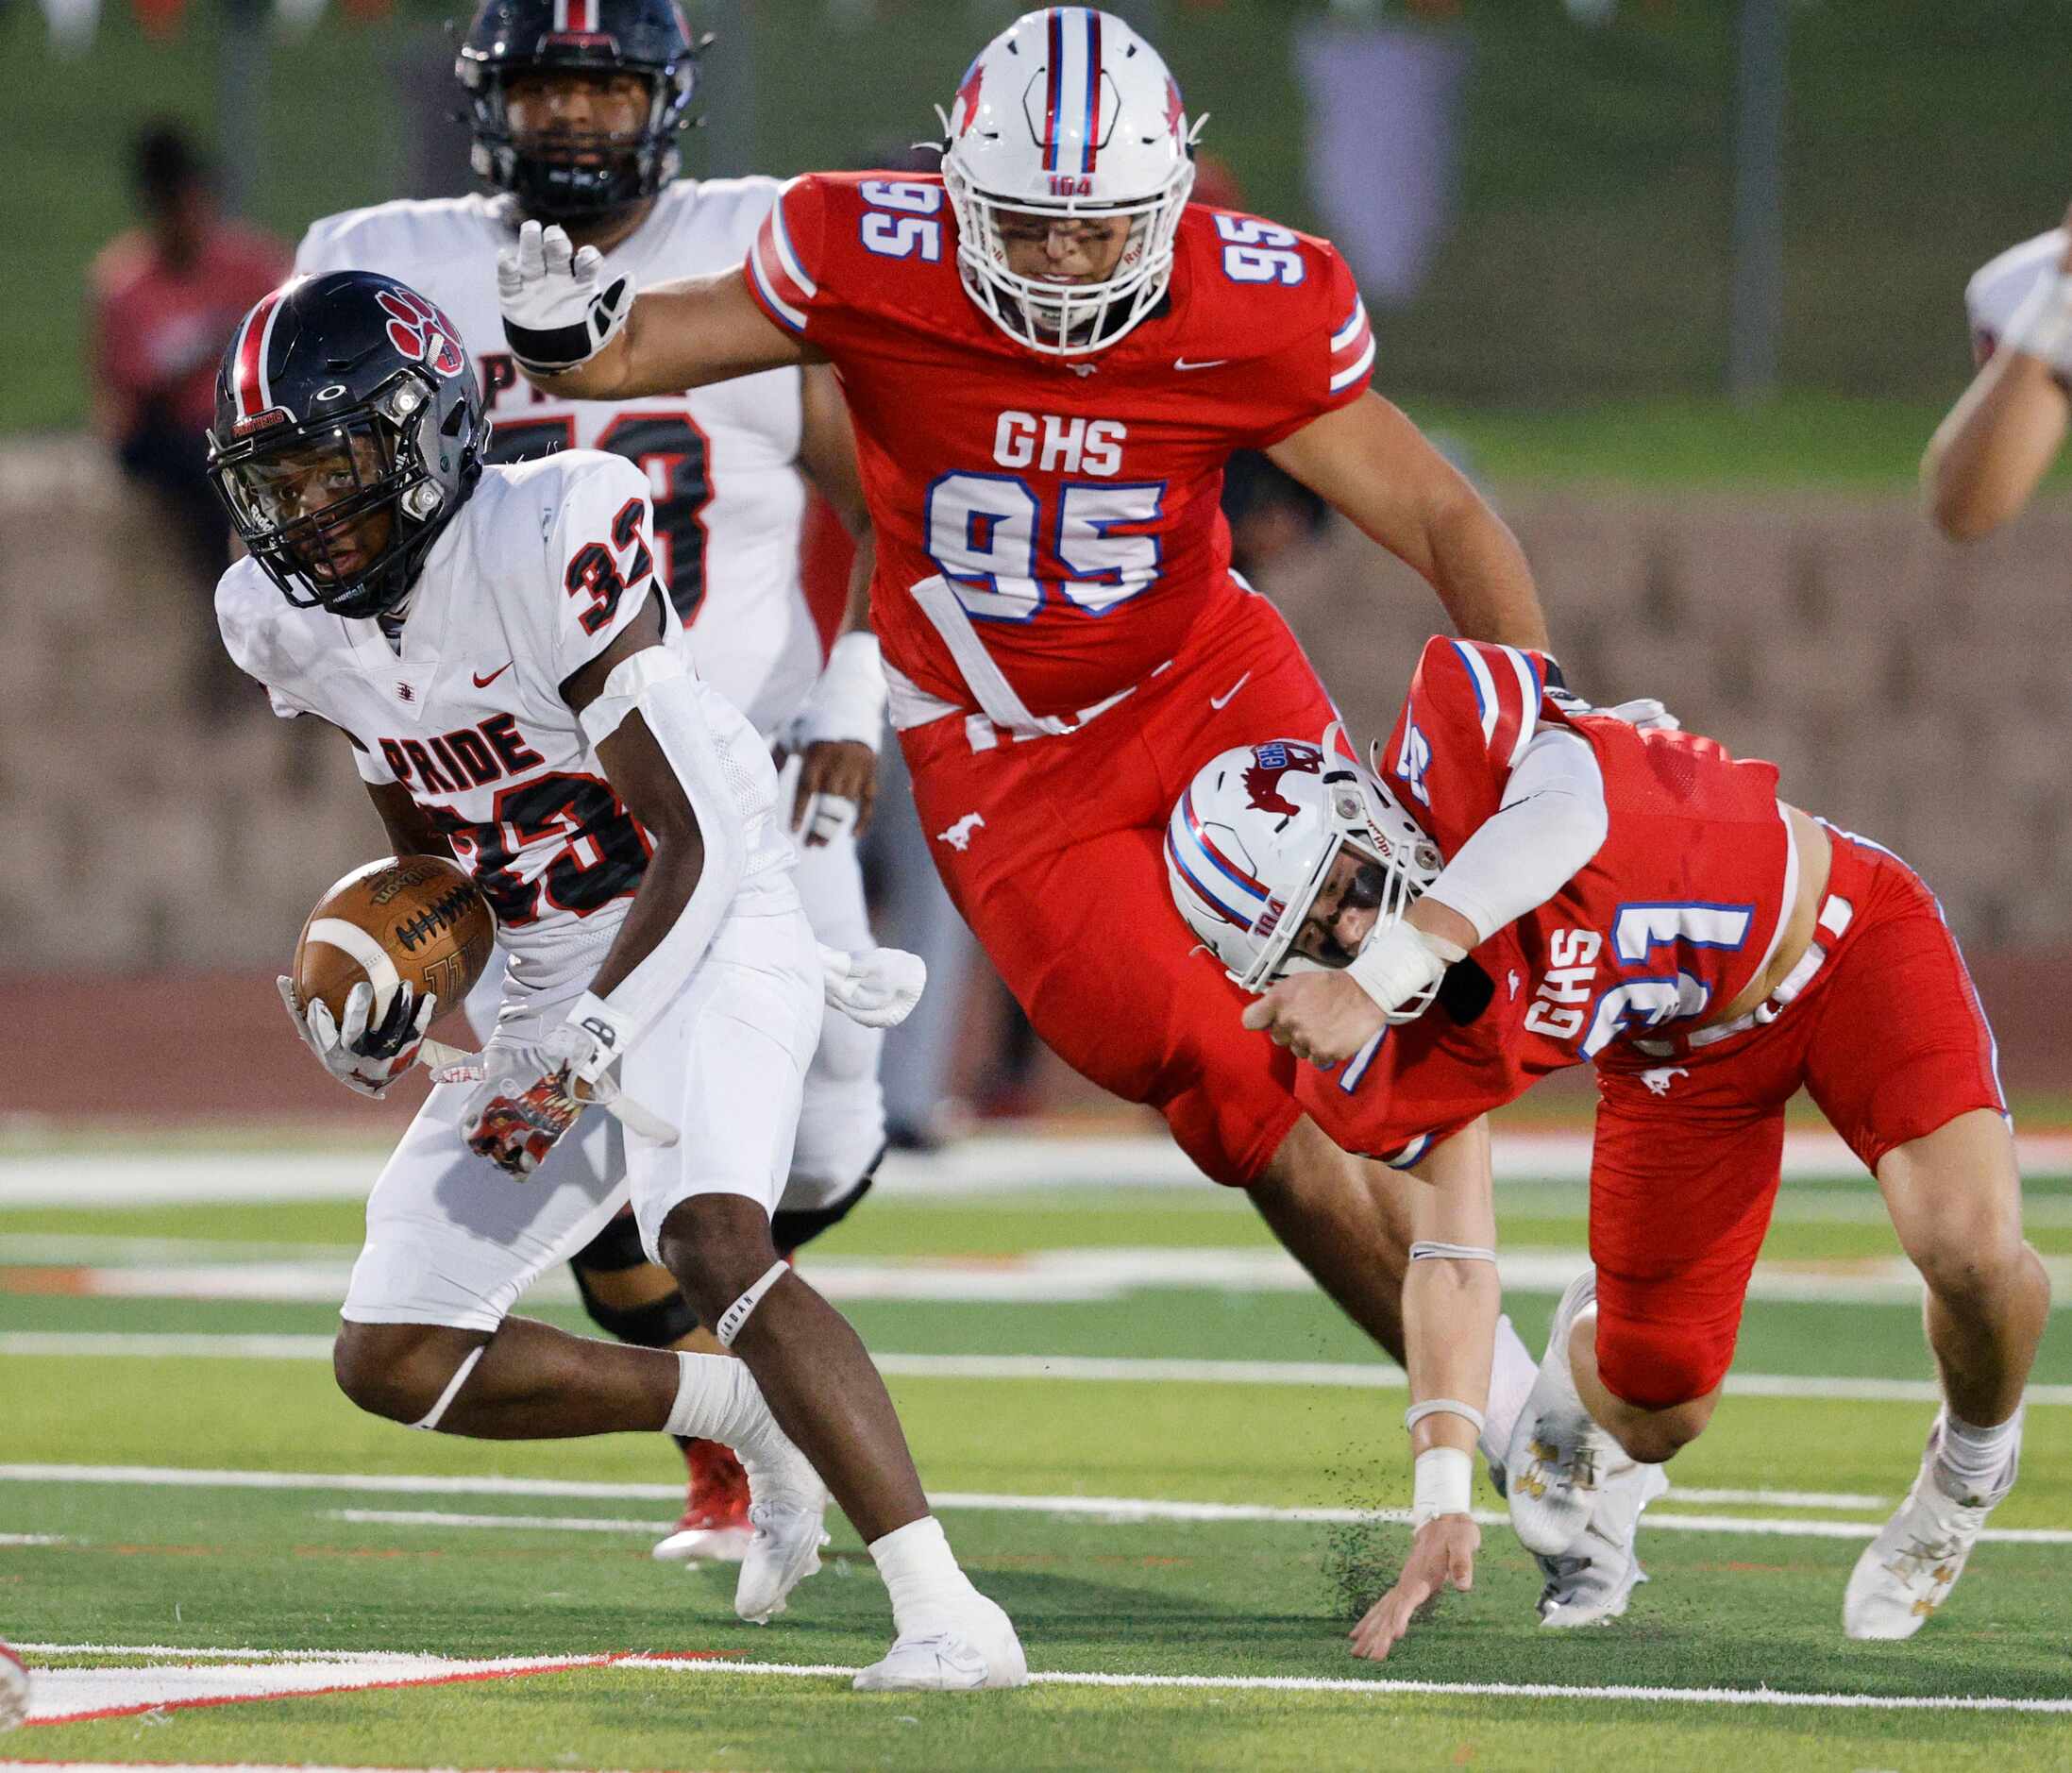 Colleyville Heritage's Colin Bennett (33) keeps a ball away from Grapevine's Cooper Towery...